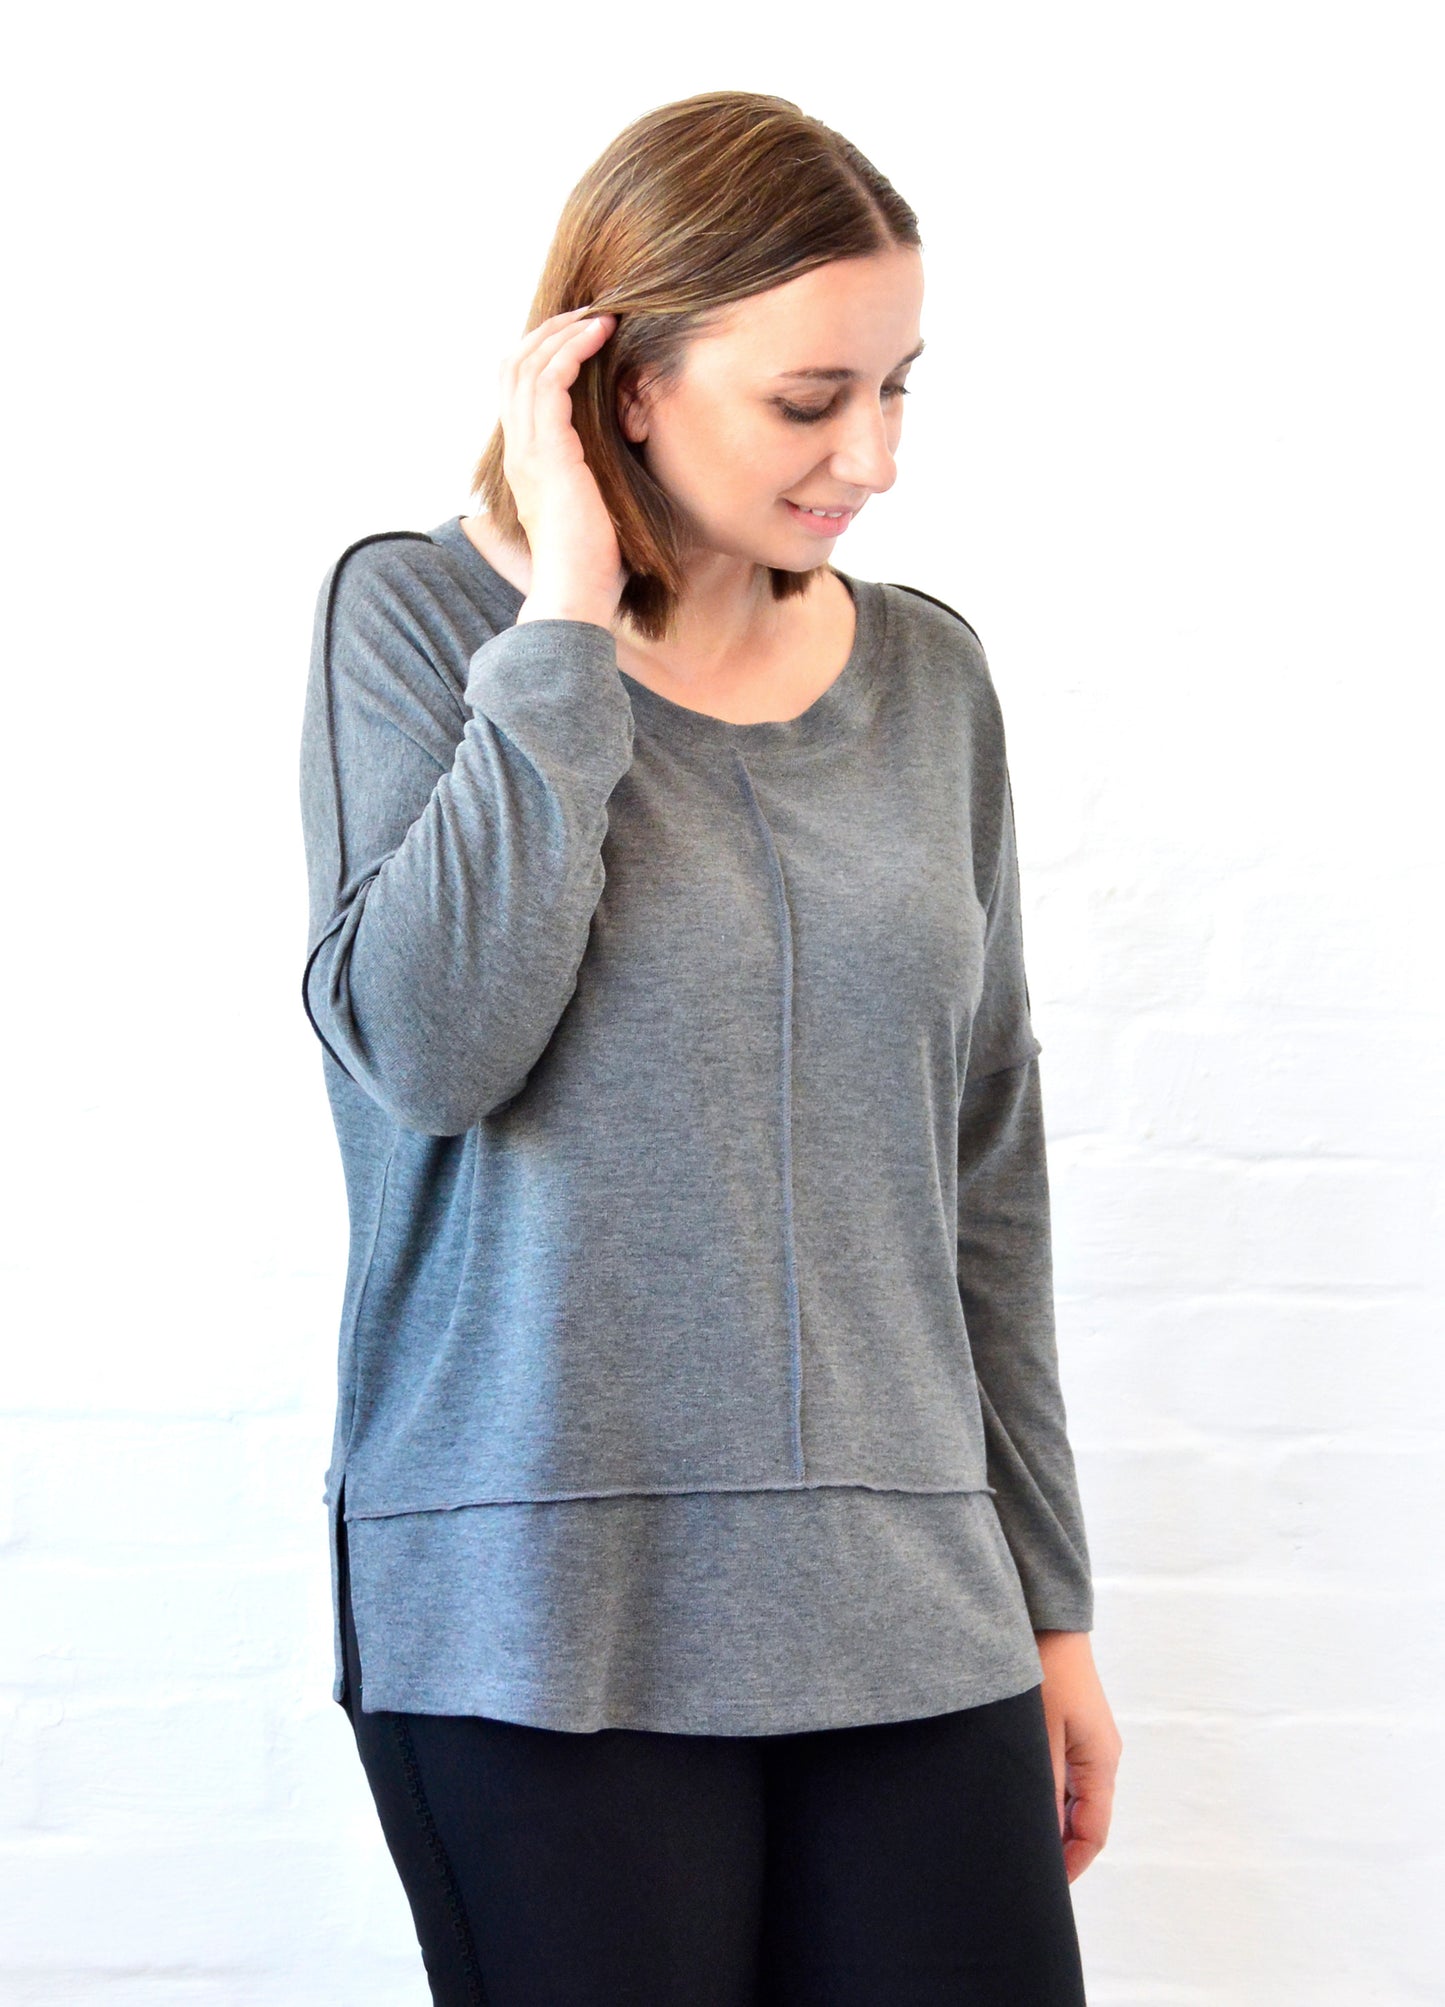 Nelly pullover in Pebble Melange